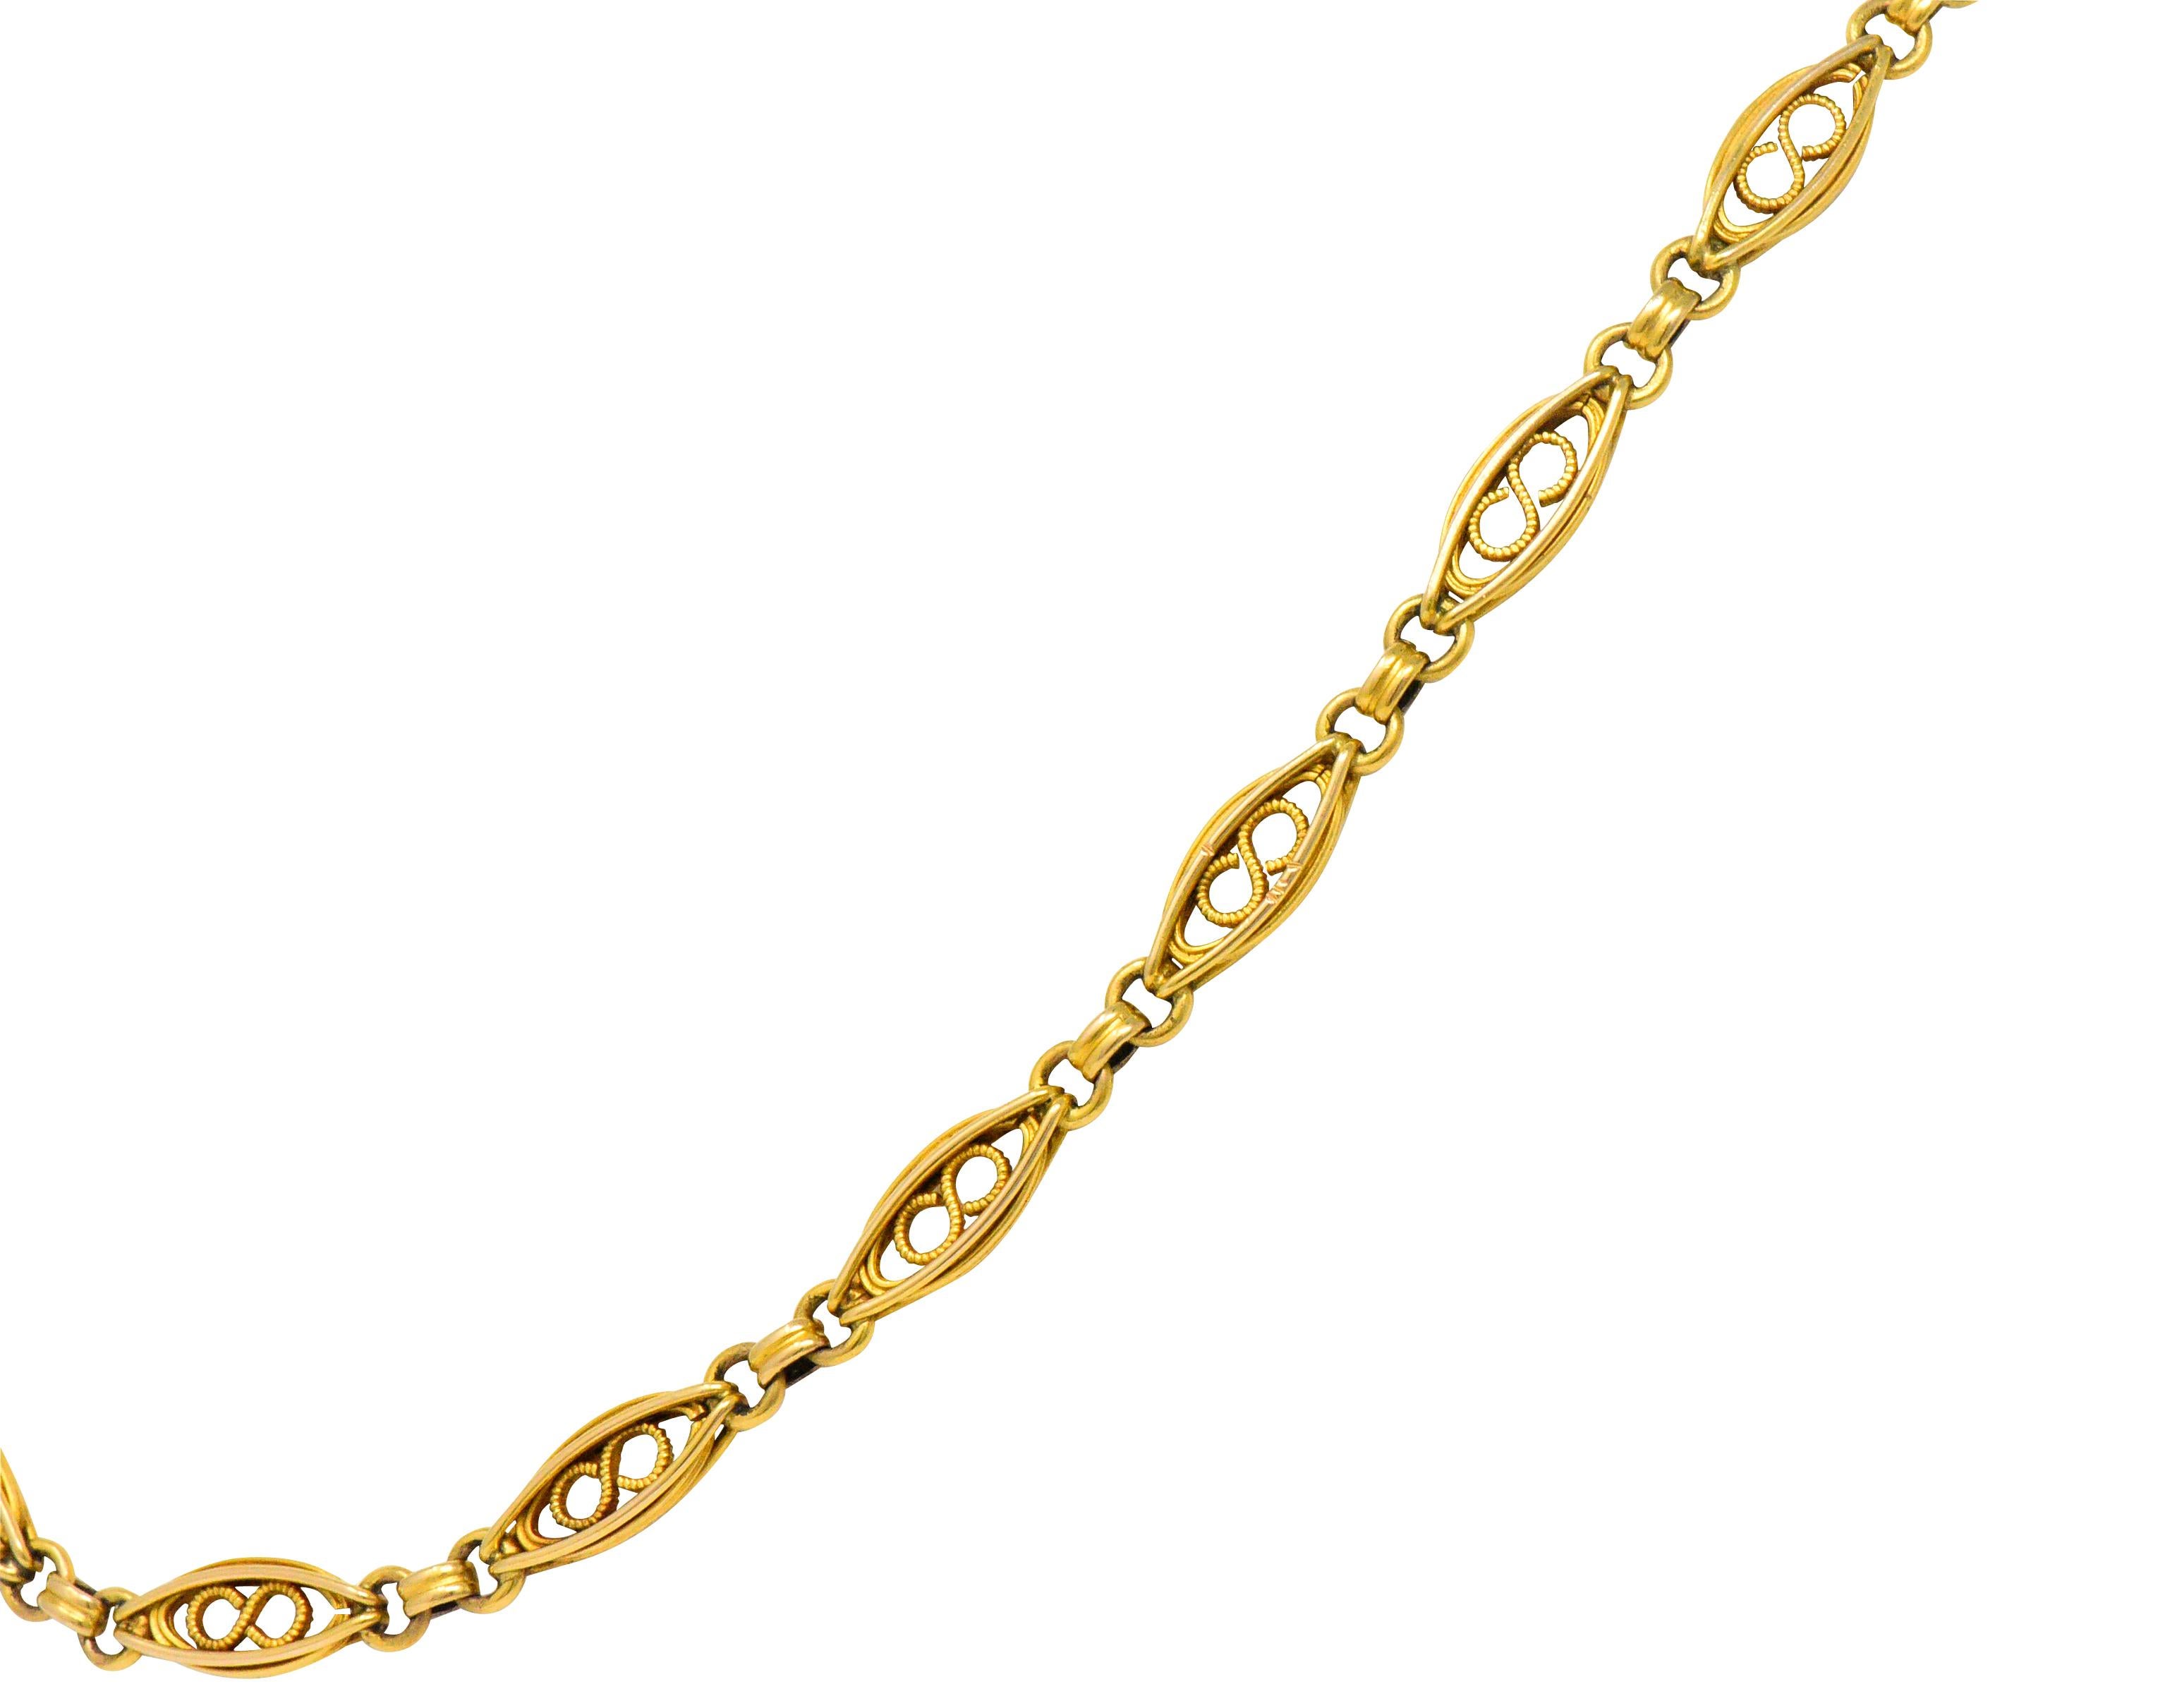 Link style necklace comprised of elongated links that center a twisted gold infinity motif

Alternating with ribbed gold spacer links

Completed by a spring ring clasp 

Length: Approx. 17 1/2 inches

Width at widest: 1/4 inch 

Total Weight: 23.0